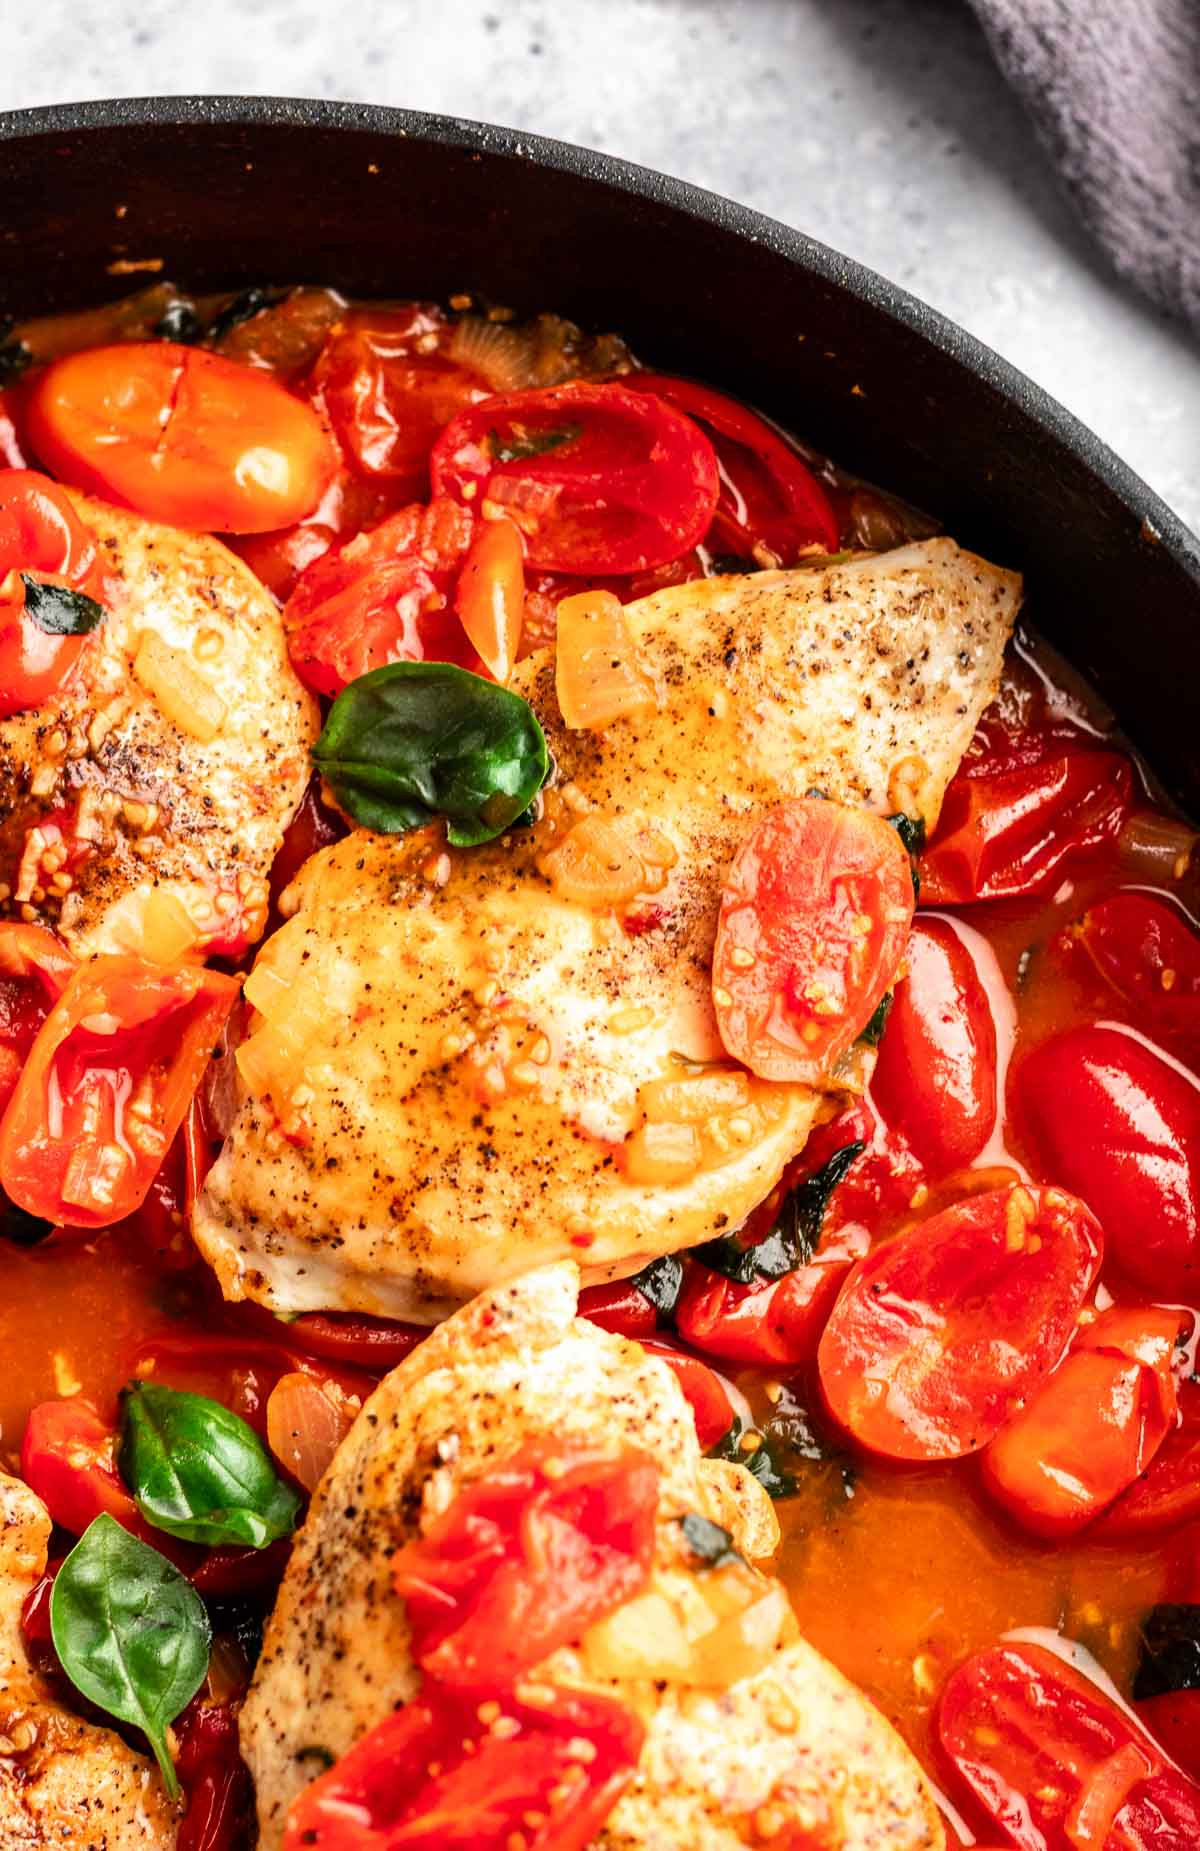 Top of chicken with tomato sauce in a pan.